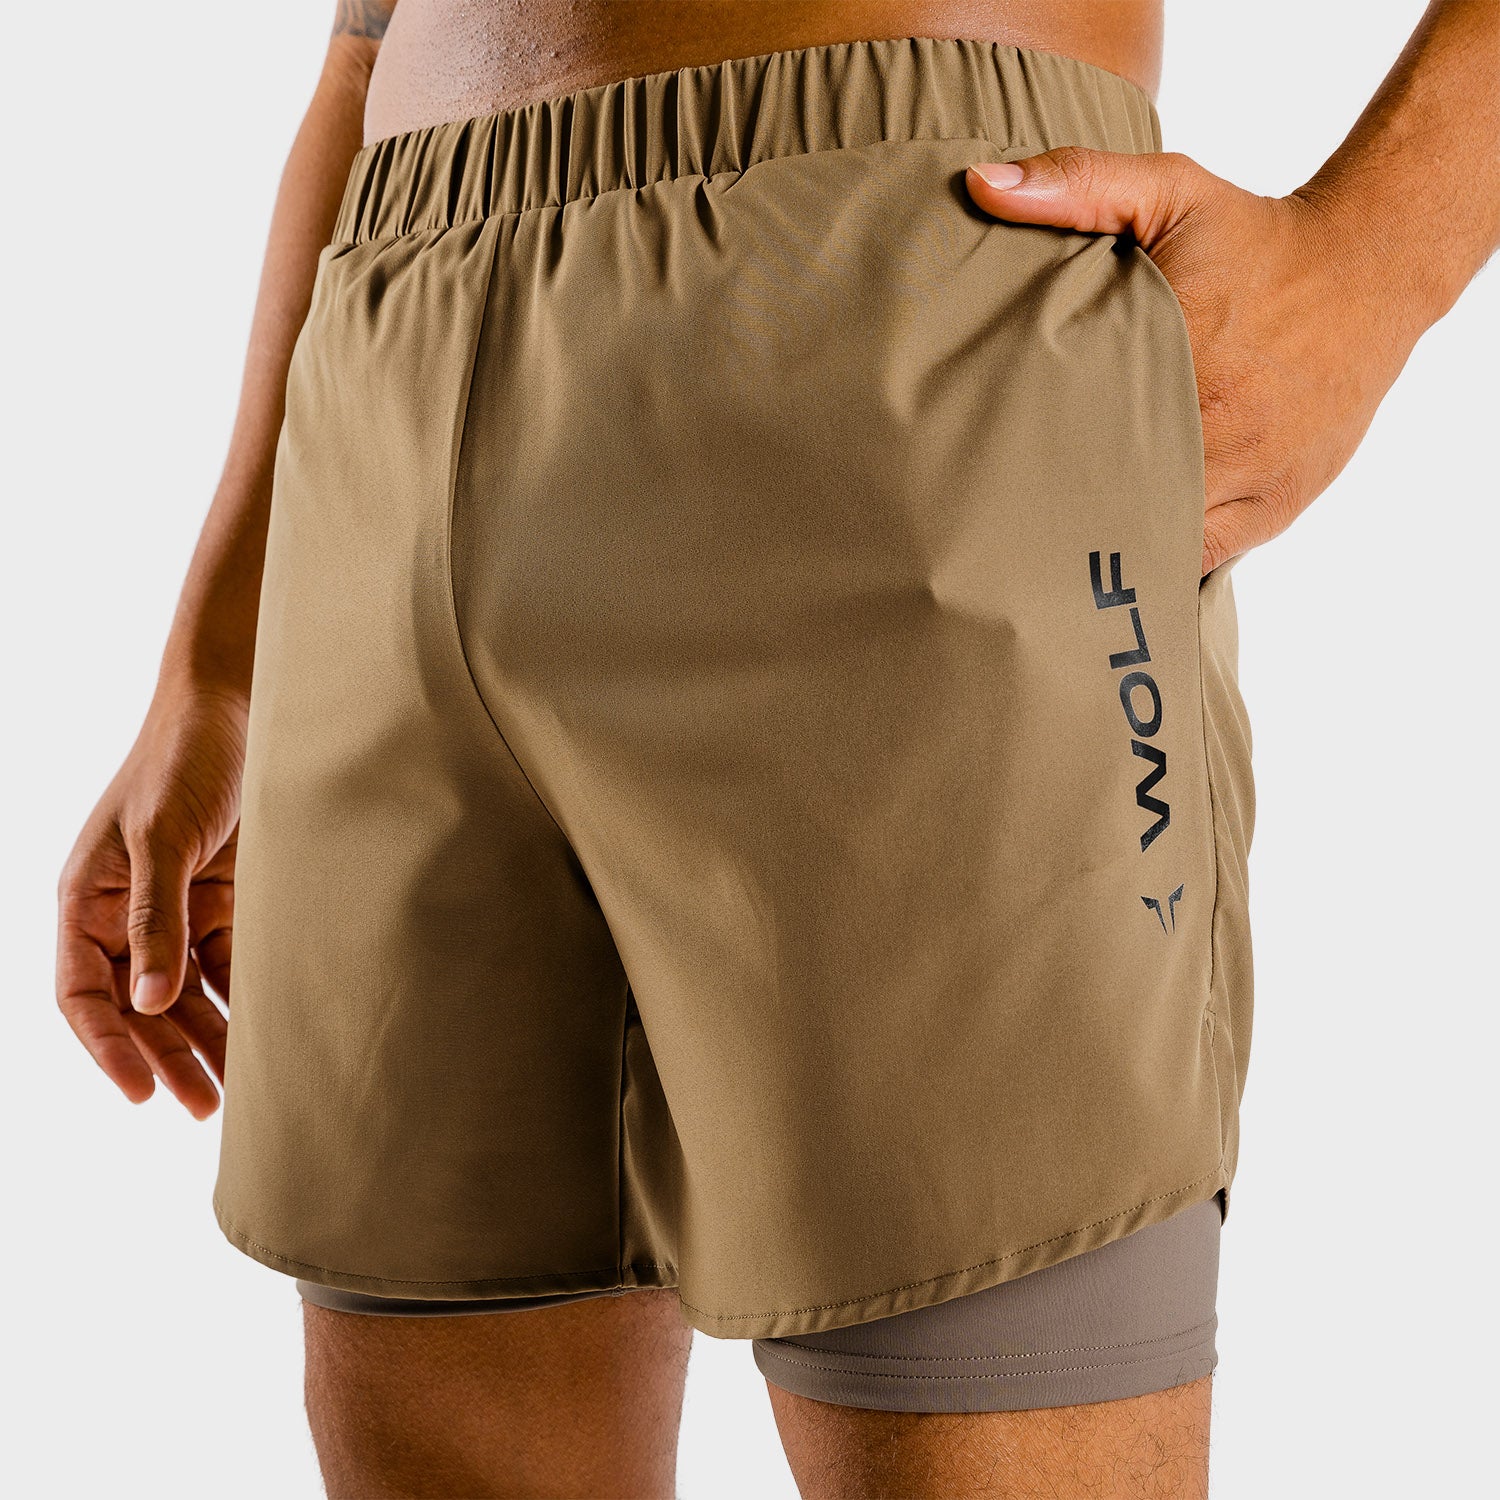 squatwolf-gym-wear-primal-shorts-2-in-1-brown-workout-shorts-for-men